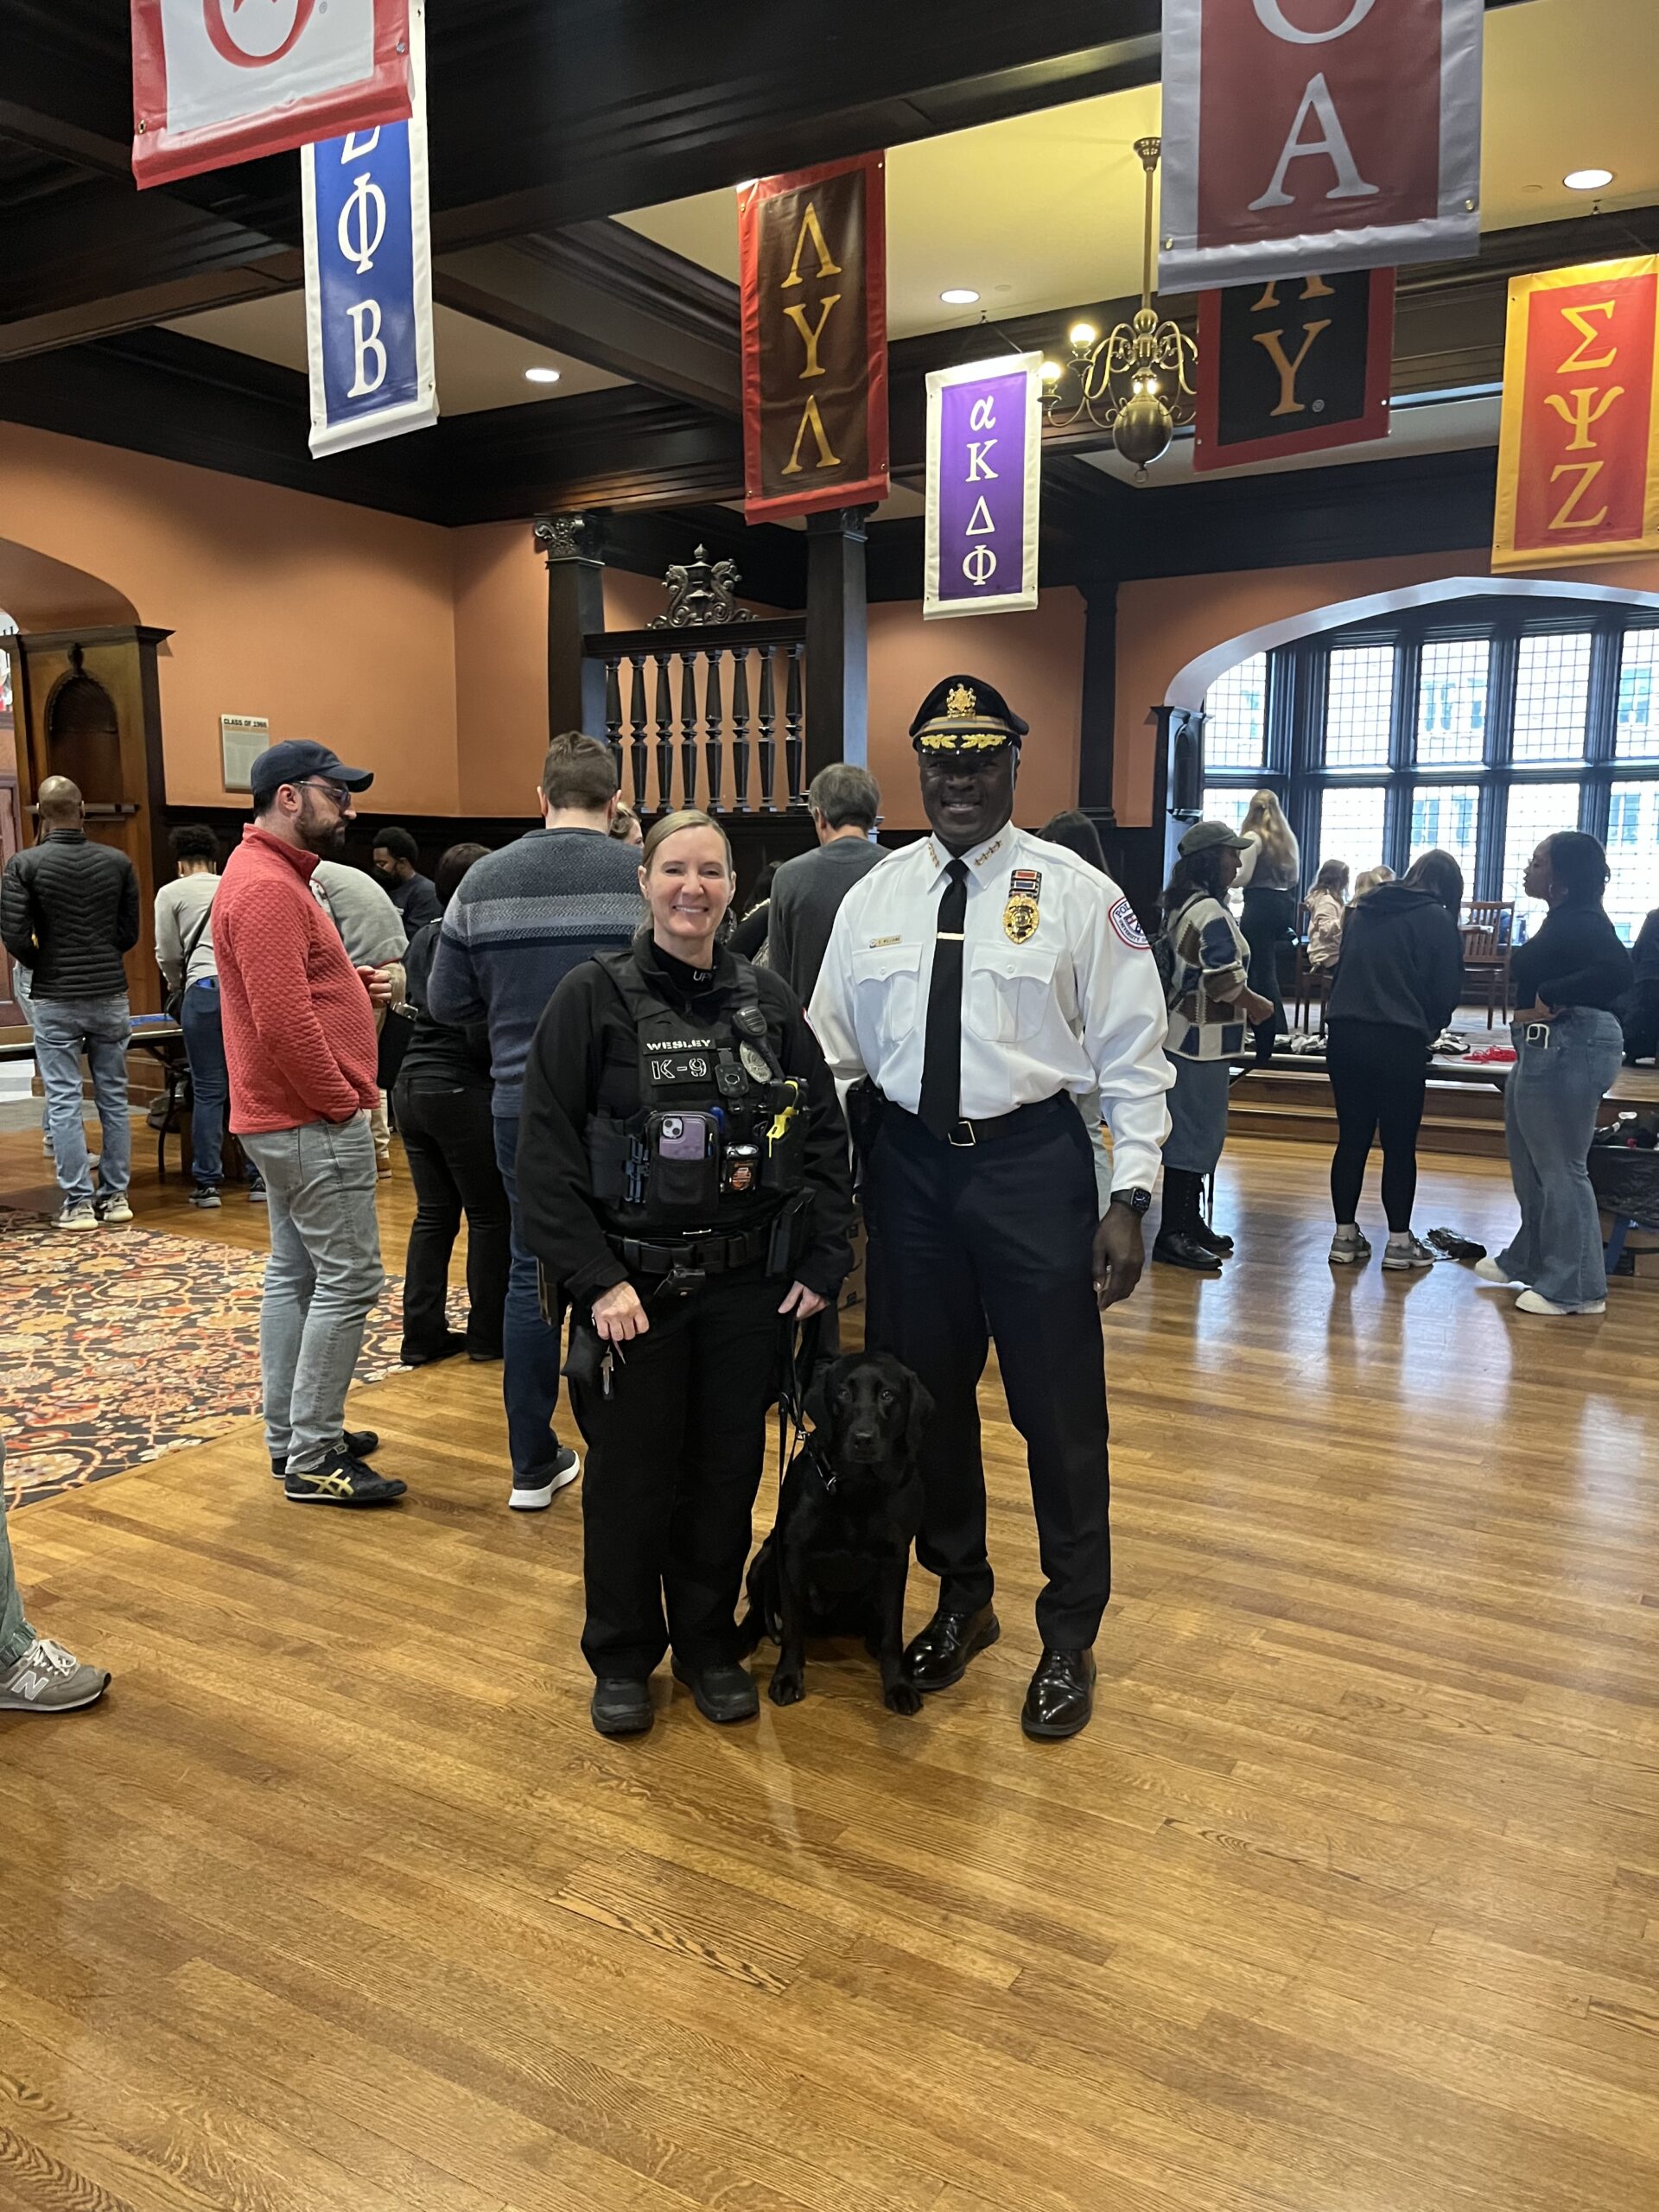 Chief Williams with Officer Wesley and K9 Officer Uman (a black labrador retriever) pose for a photo in Houston Hall as a volunteer event is taking place.